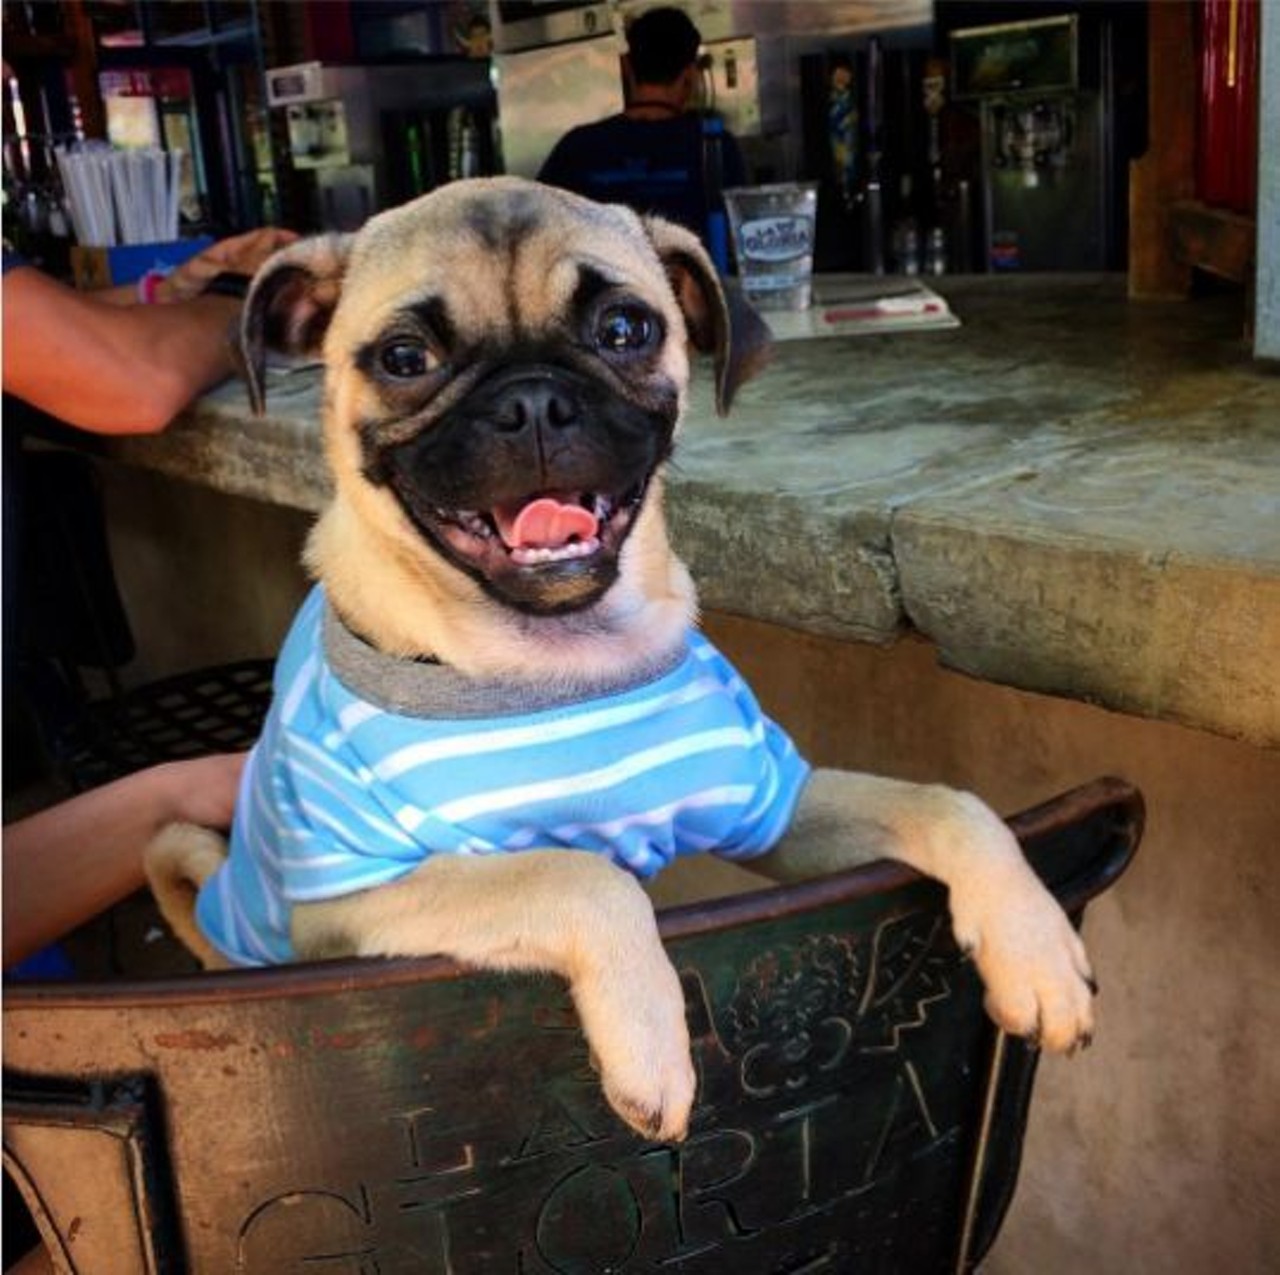 La Gloria  
100 E. Grayson St., (210) 267-9040 
La Gloria treats its four-legged customers like royalty. Stop at the Pearl with your pup for some drinks at La Gloria and then a walk around the square. 
Photo via Instagram,unclefrankthepug